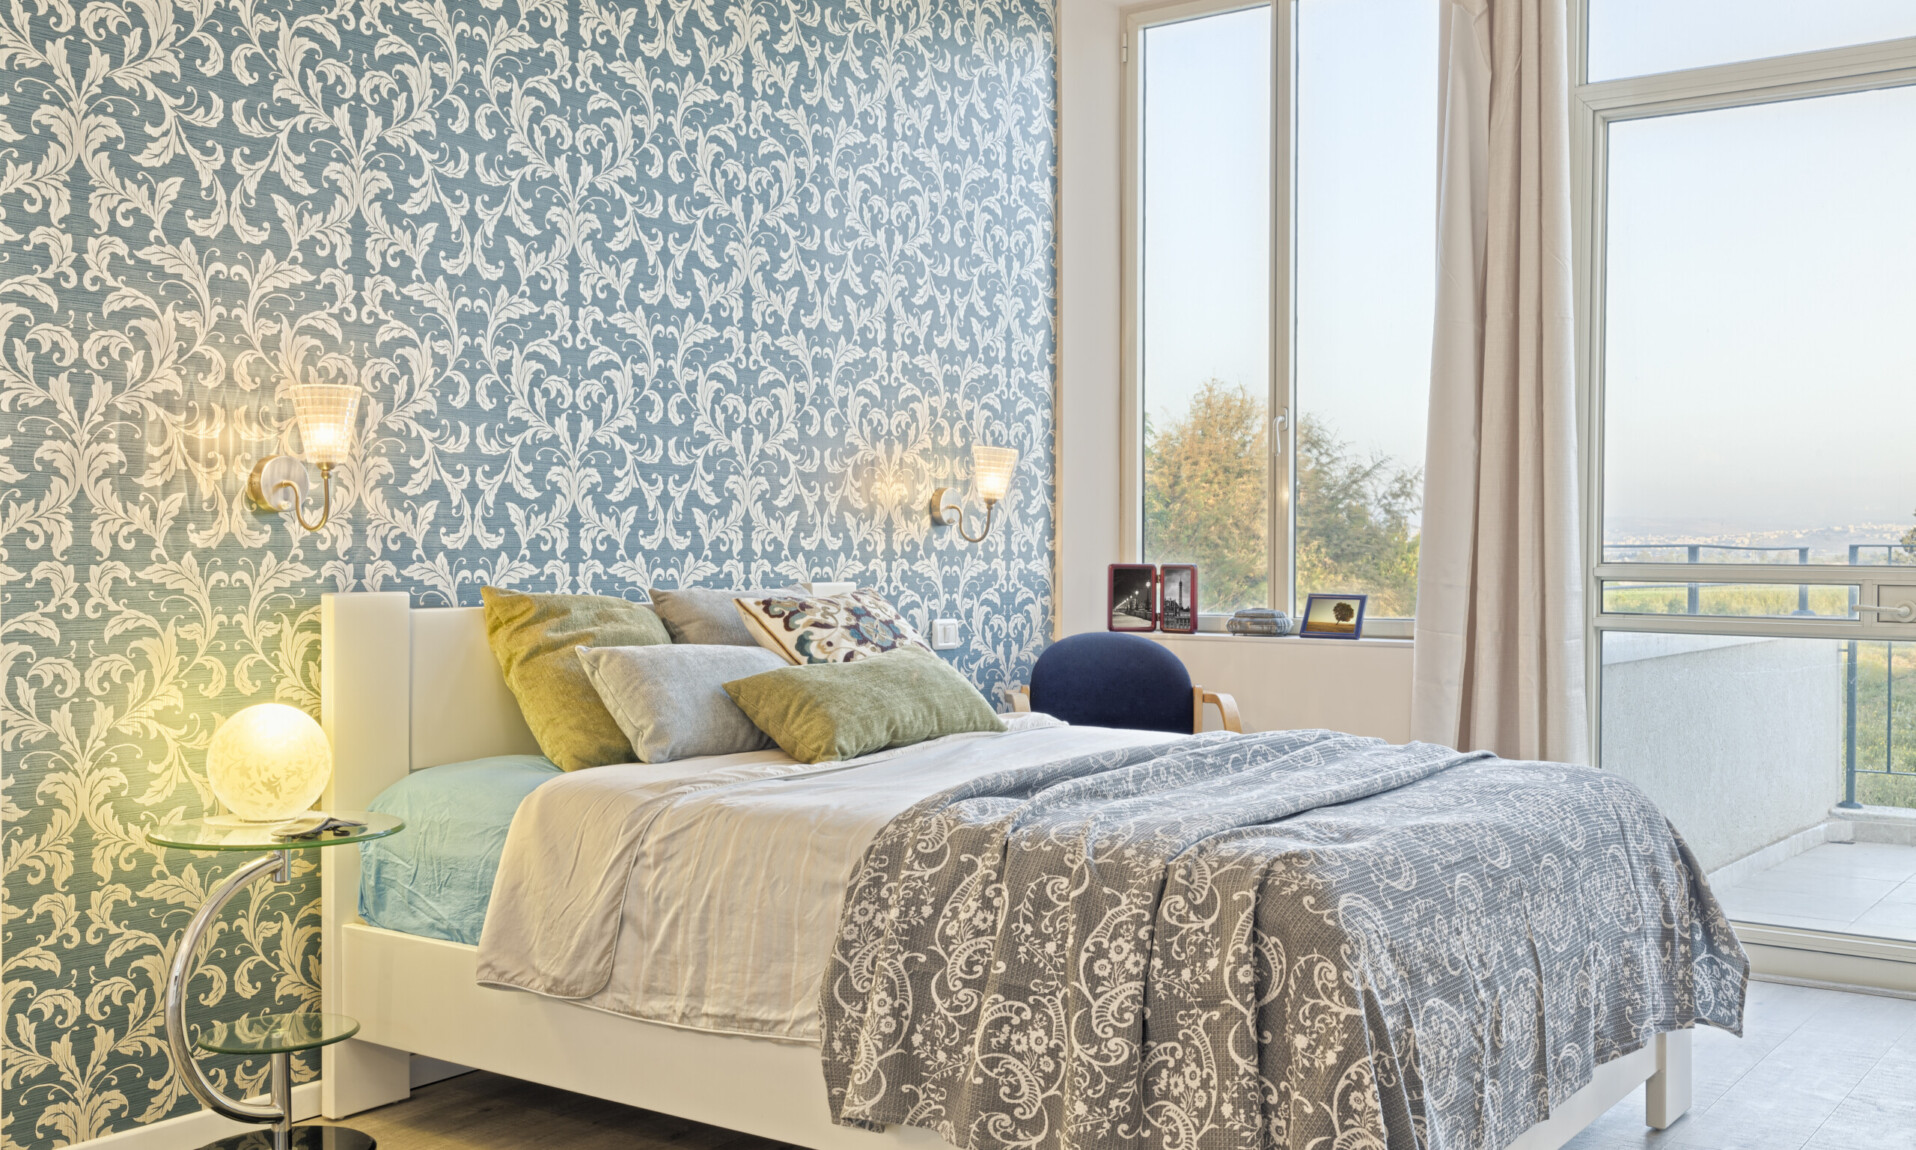 Bedroom Wallpaper Ideas 2021 | Stunning Trends To Try - Décor Aid